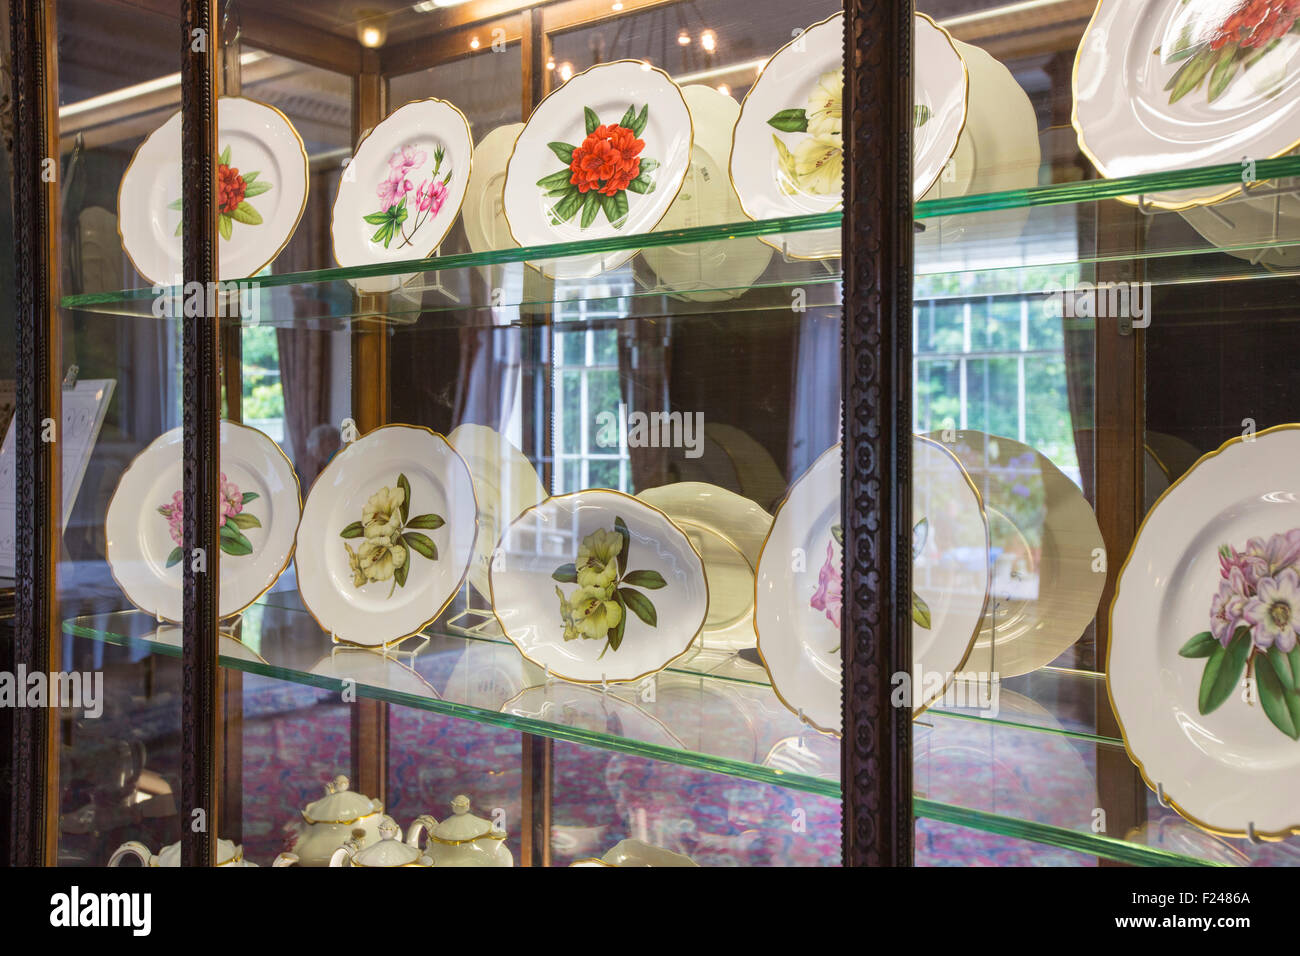 Part of the Copeland China collection in Trelissick house near Falmouth, Cornwall, UK. Stock Photo